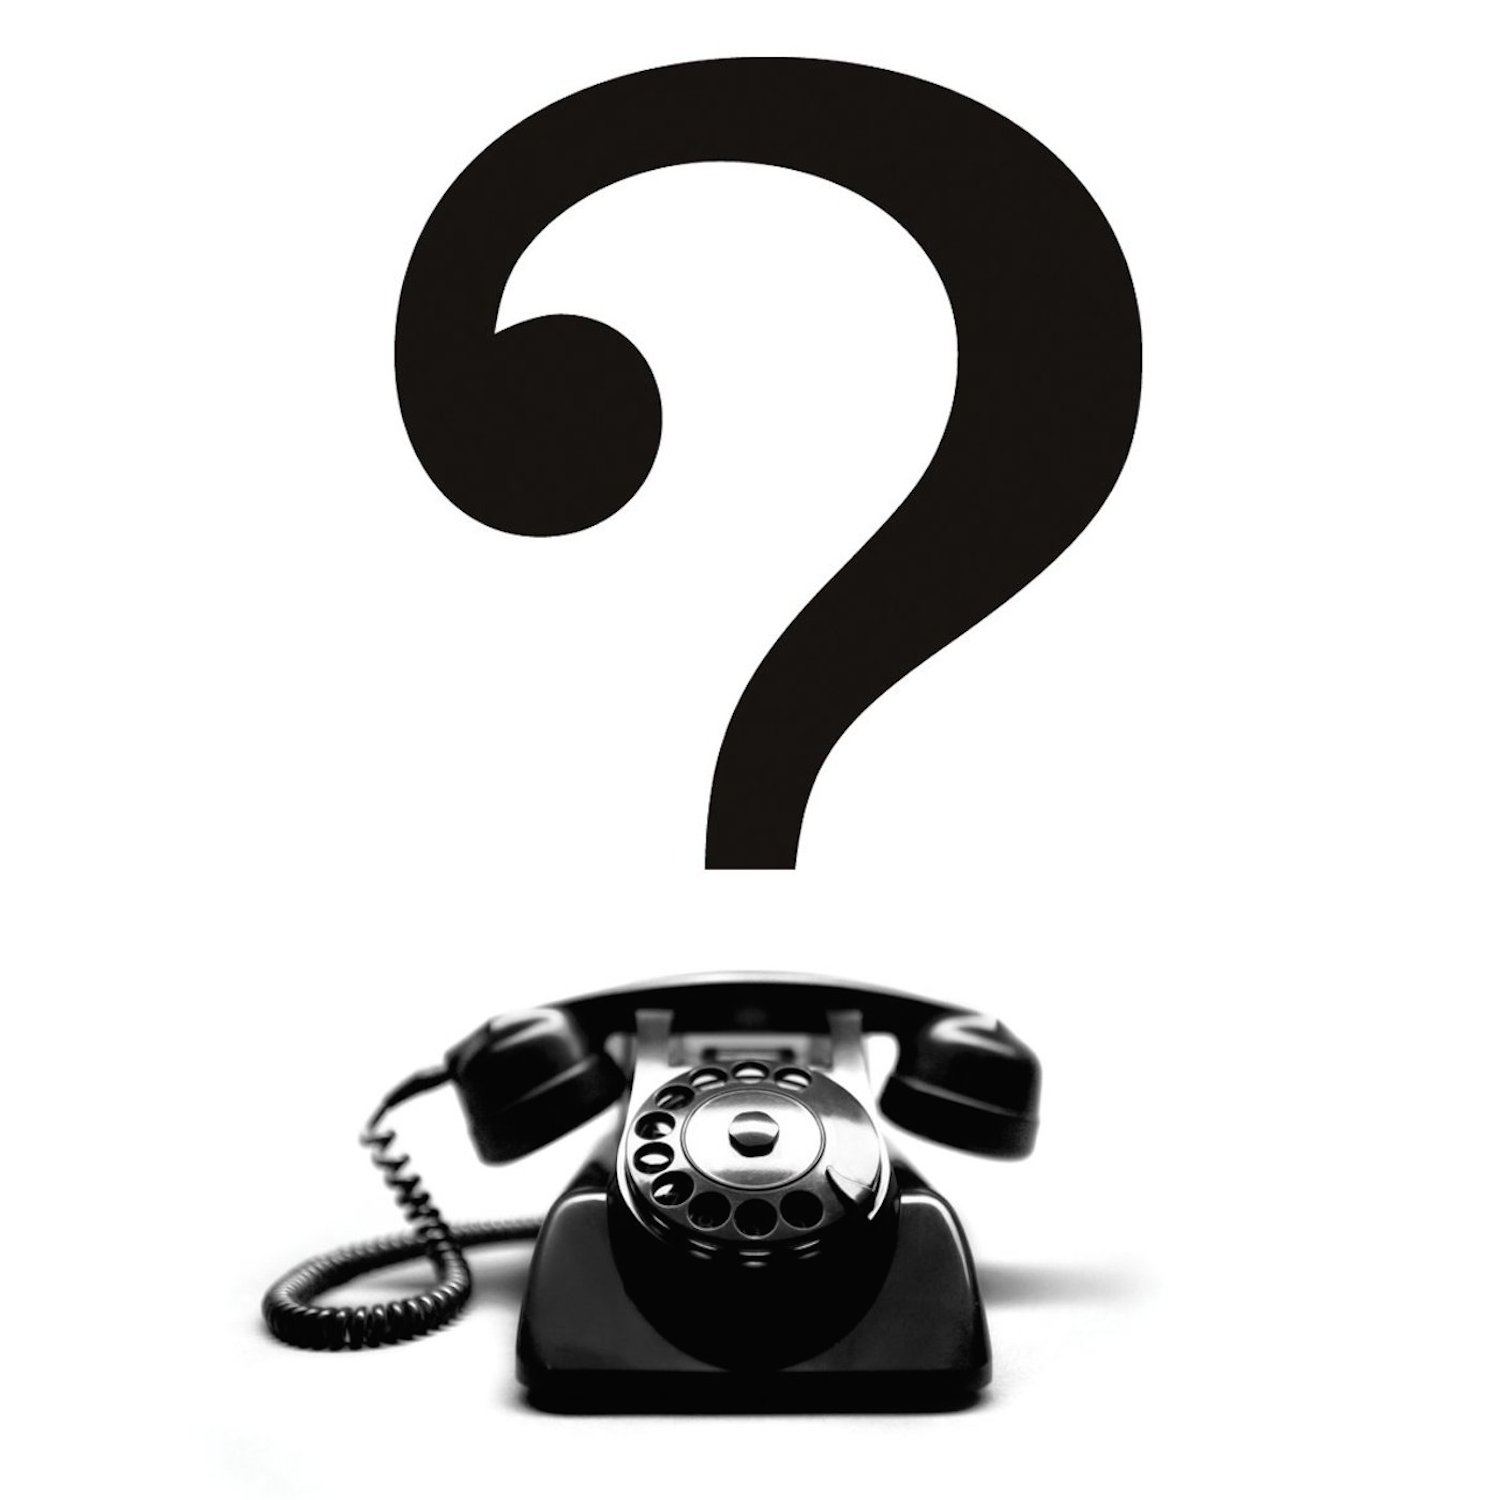 Am I Called - Calling Questions #5 - Should A Guy Leave His Church If He Has No Ministry Opportunities?